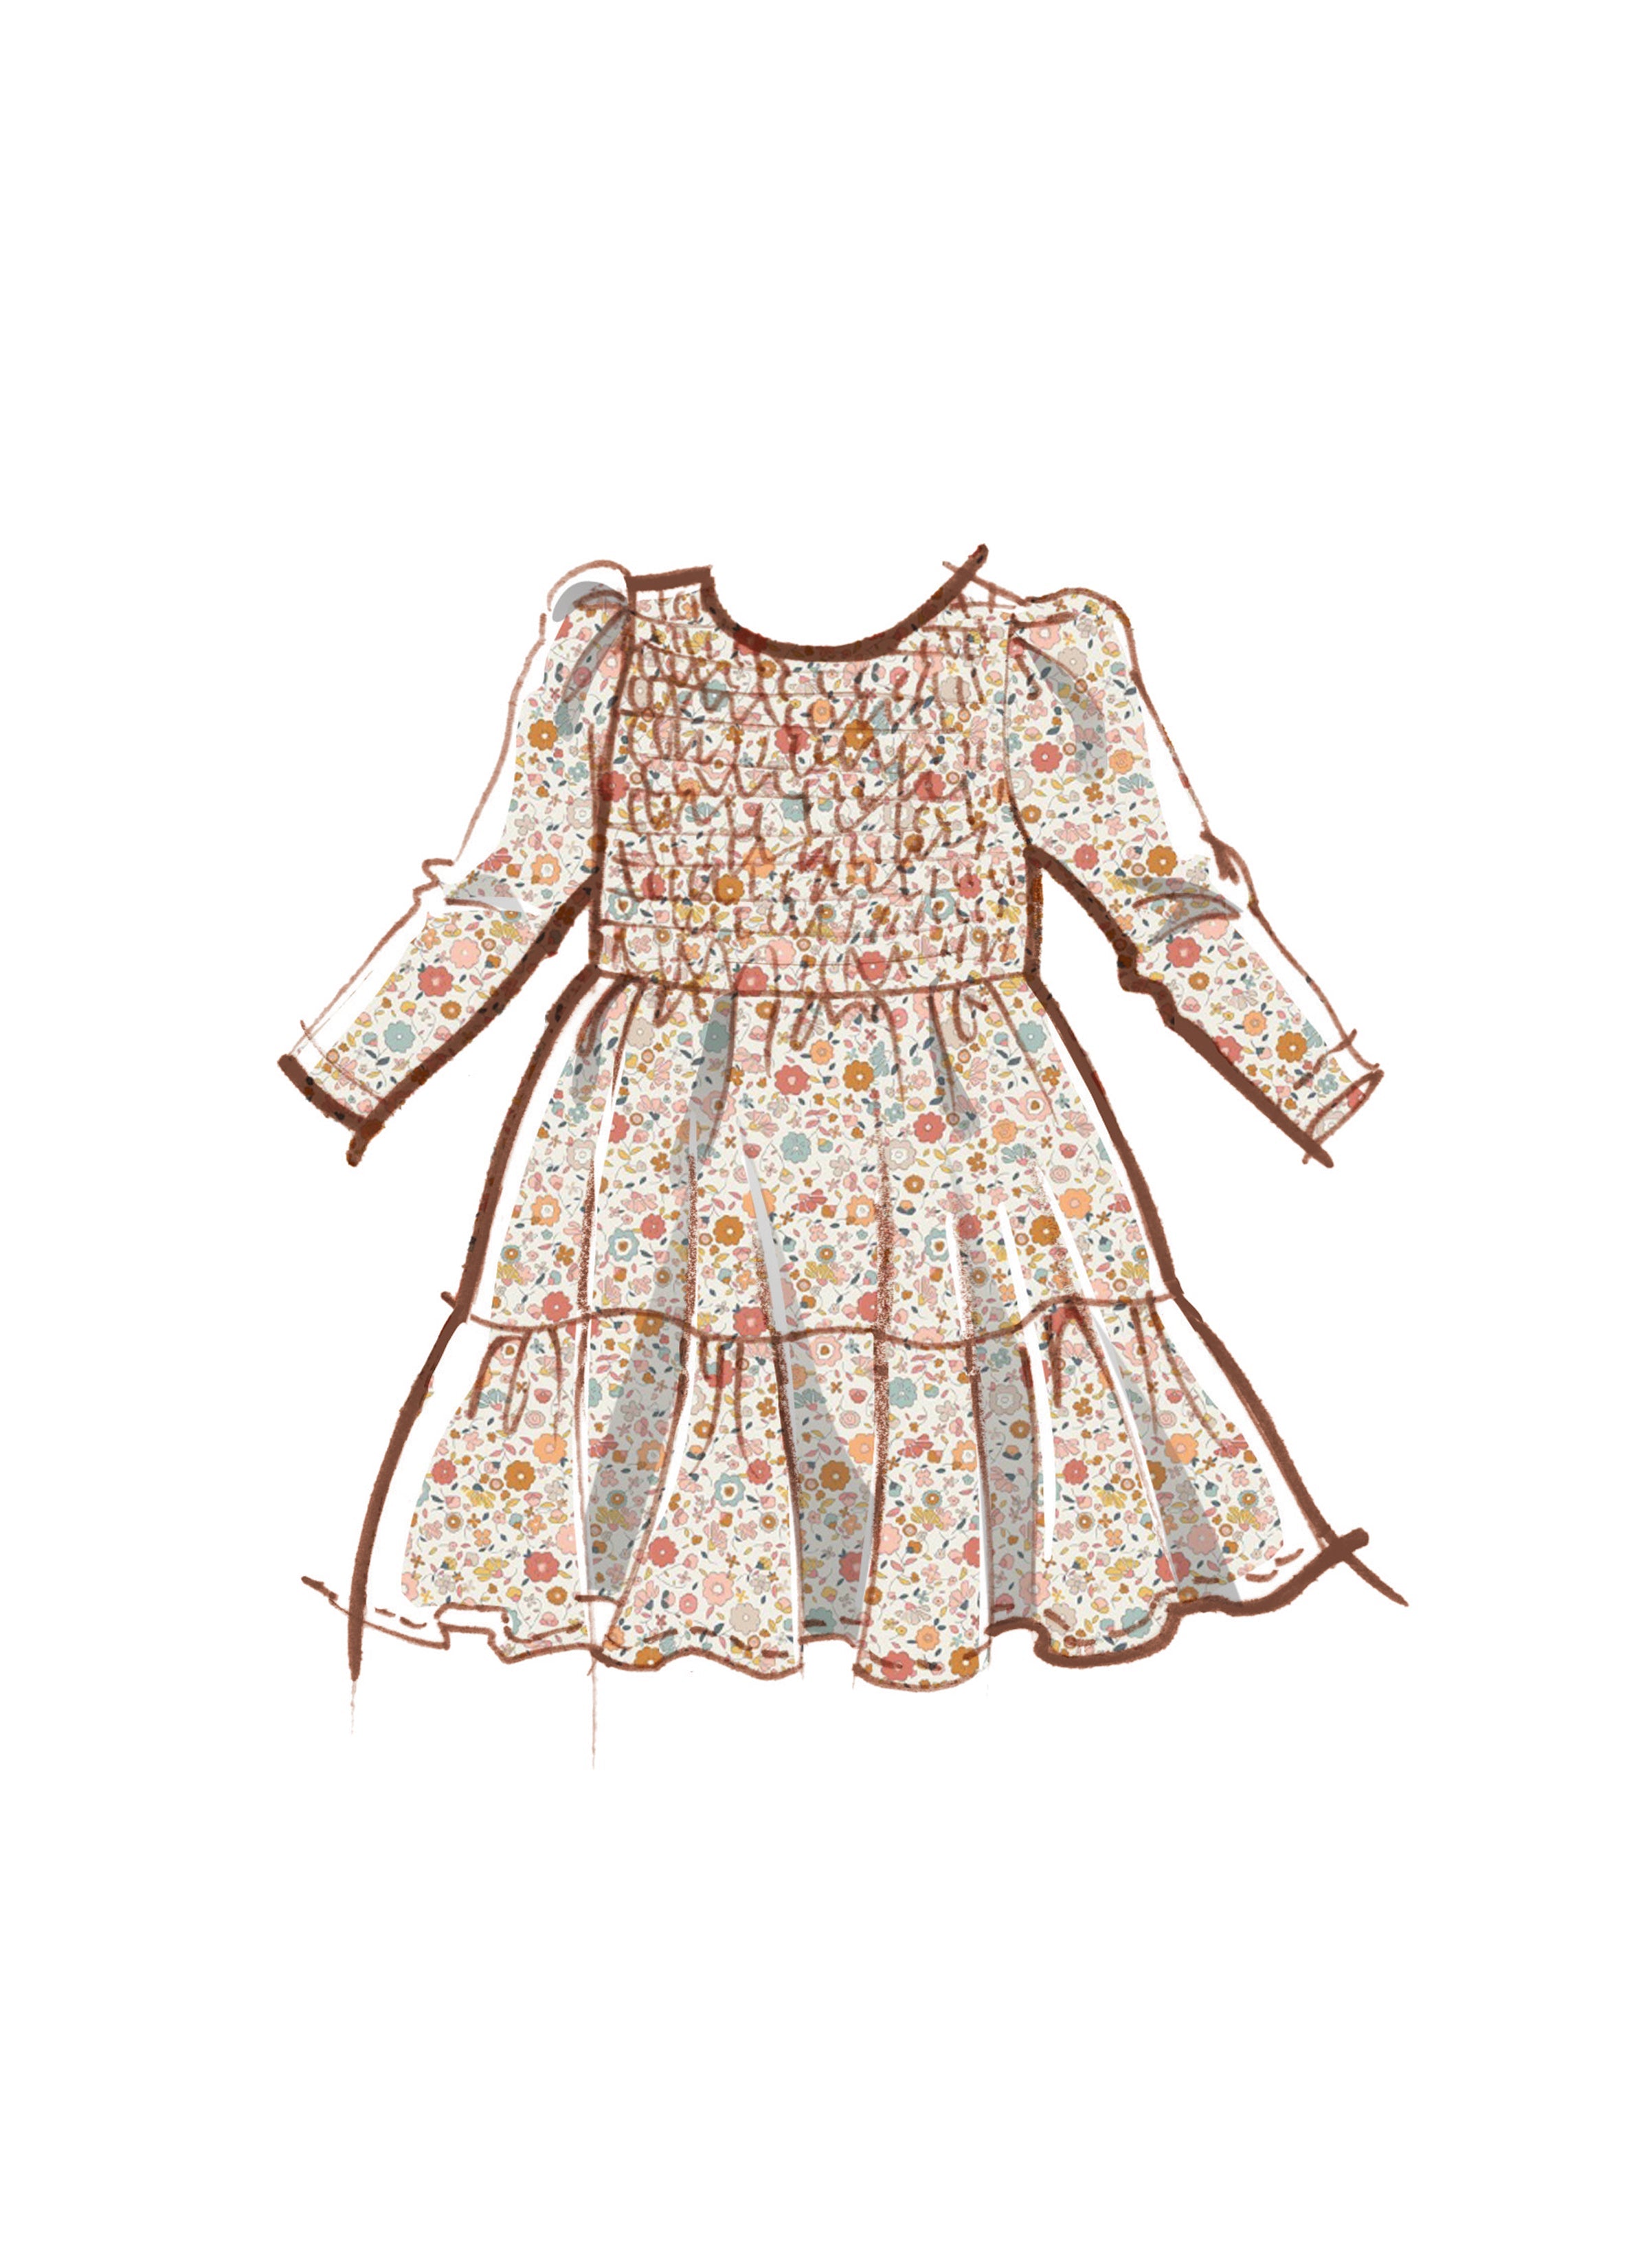 McCall's sewing pattern 8417 Children's Dress by Laura Ashley from Jaycotts Sewing Supplies